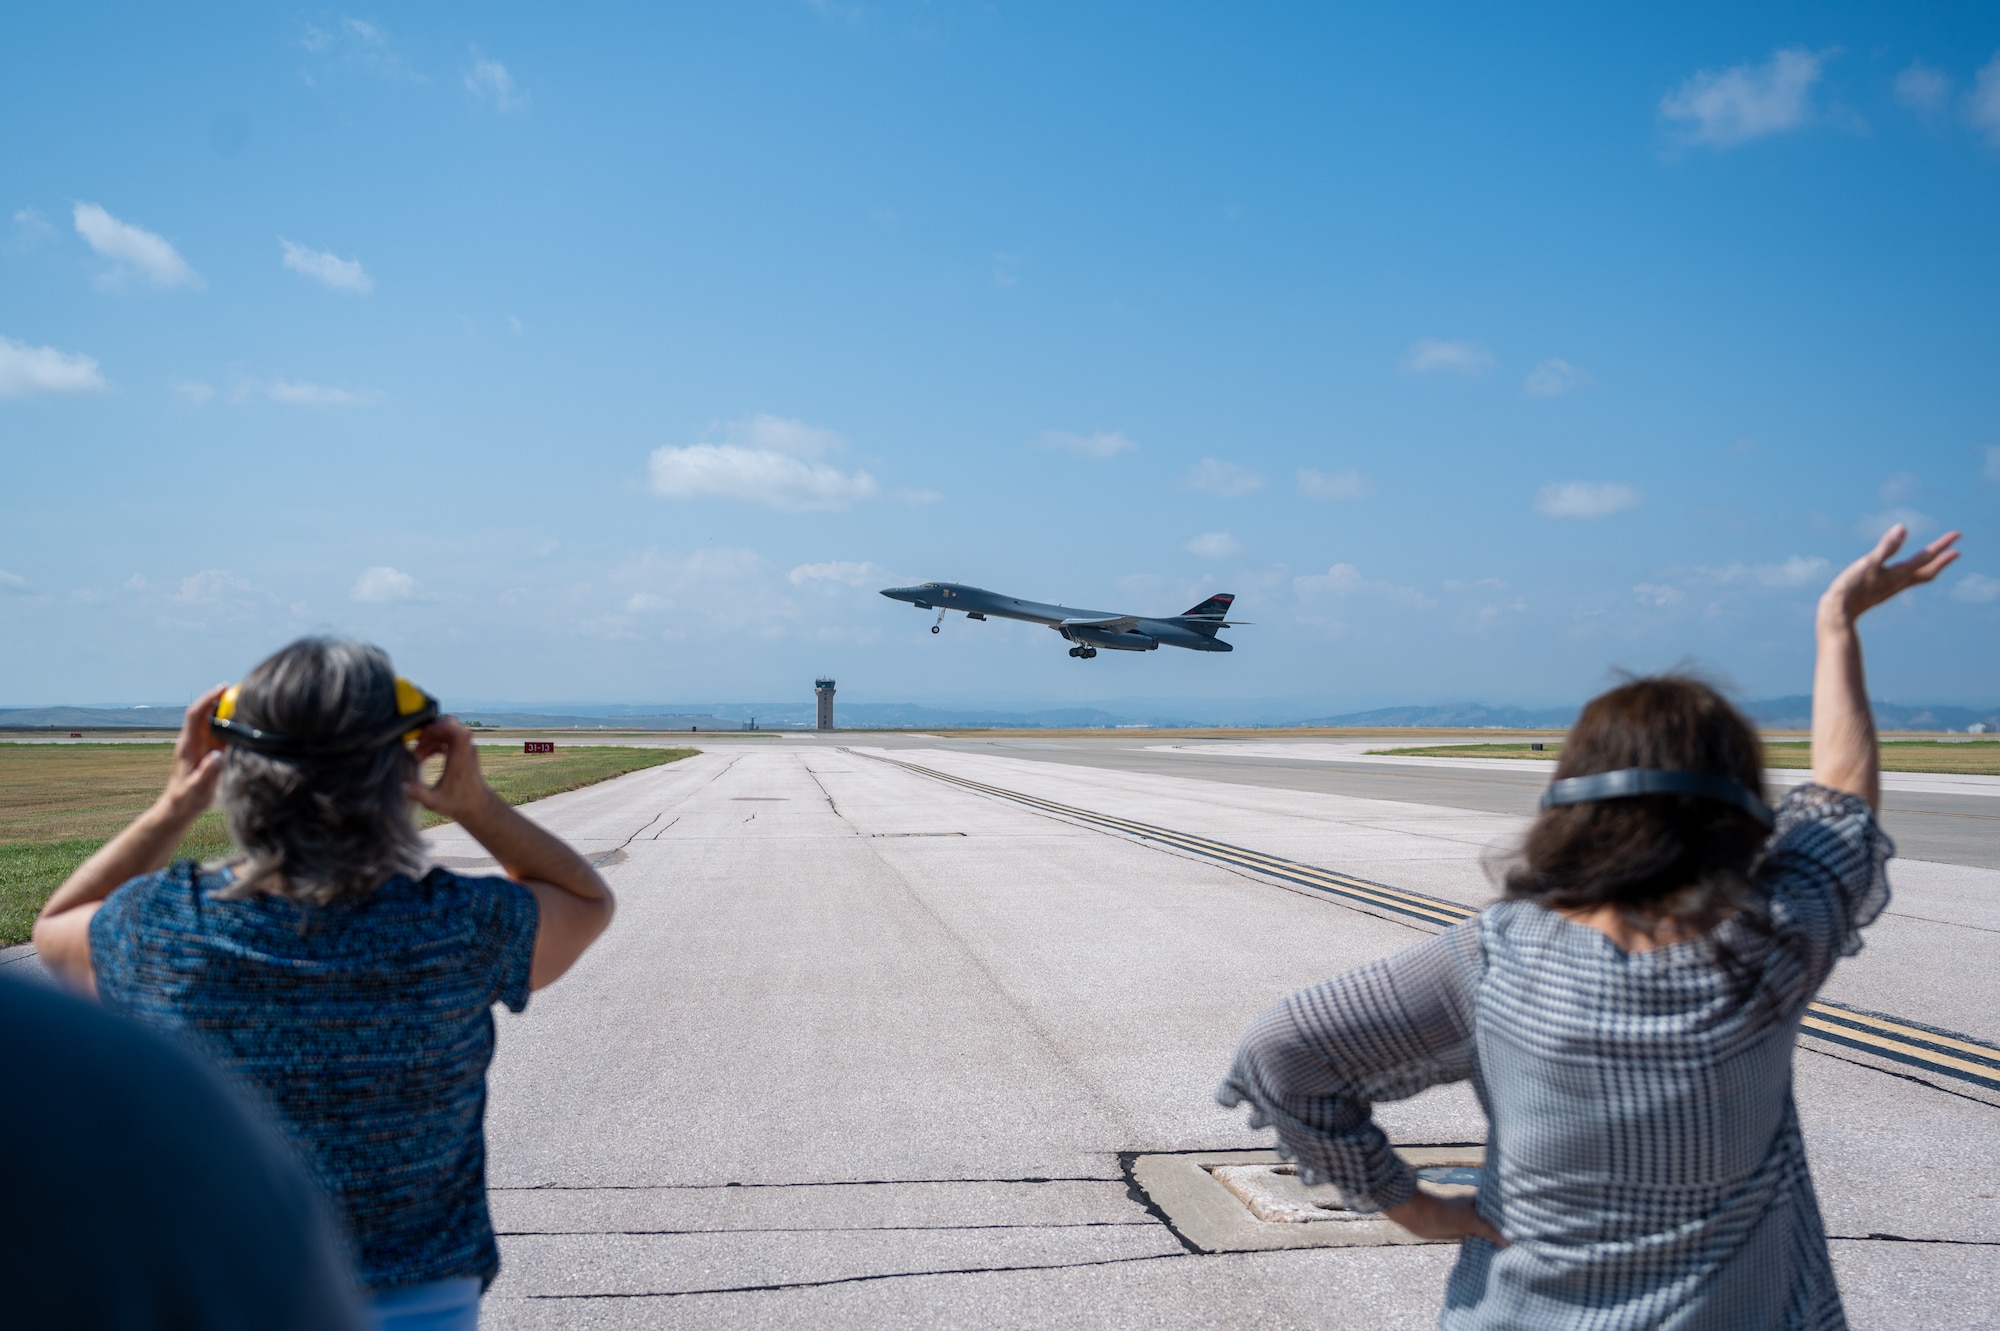 Susan Bower (Left) and Cindy Cole Chal (Right) view a B-1B Lancer takeoff at Ellsworth AFB, S.D. on Sept 16, 2022. The Lancer is a highly versatile, aircraft that carries on the legacy of the Doolittle Raid, providing worldwide long-range-strike capabilities. (U.S. Air Force Photo by Senior Airman Austin McIntosh)